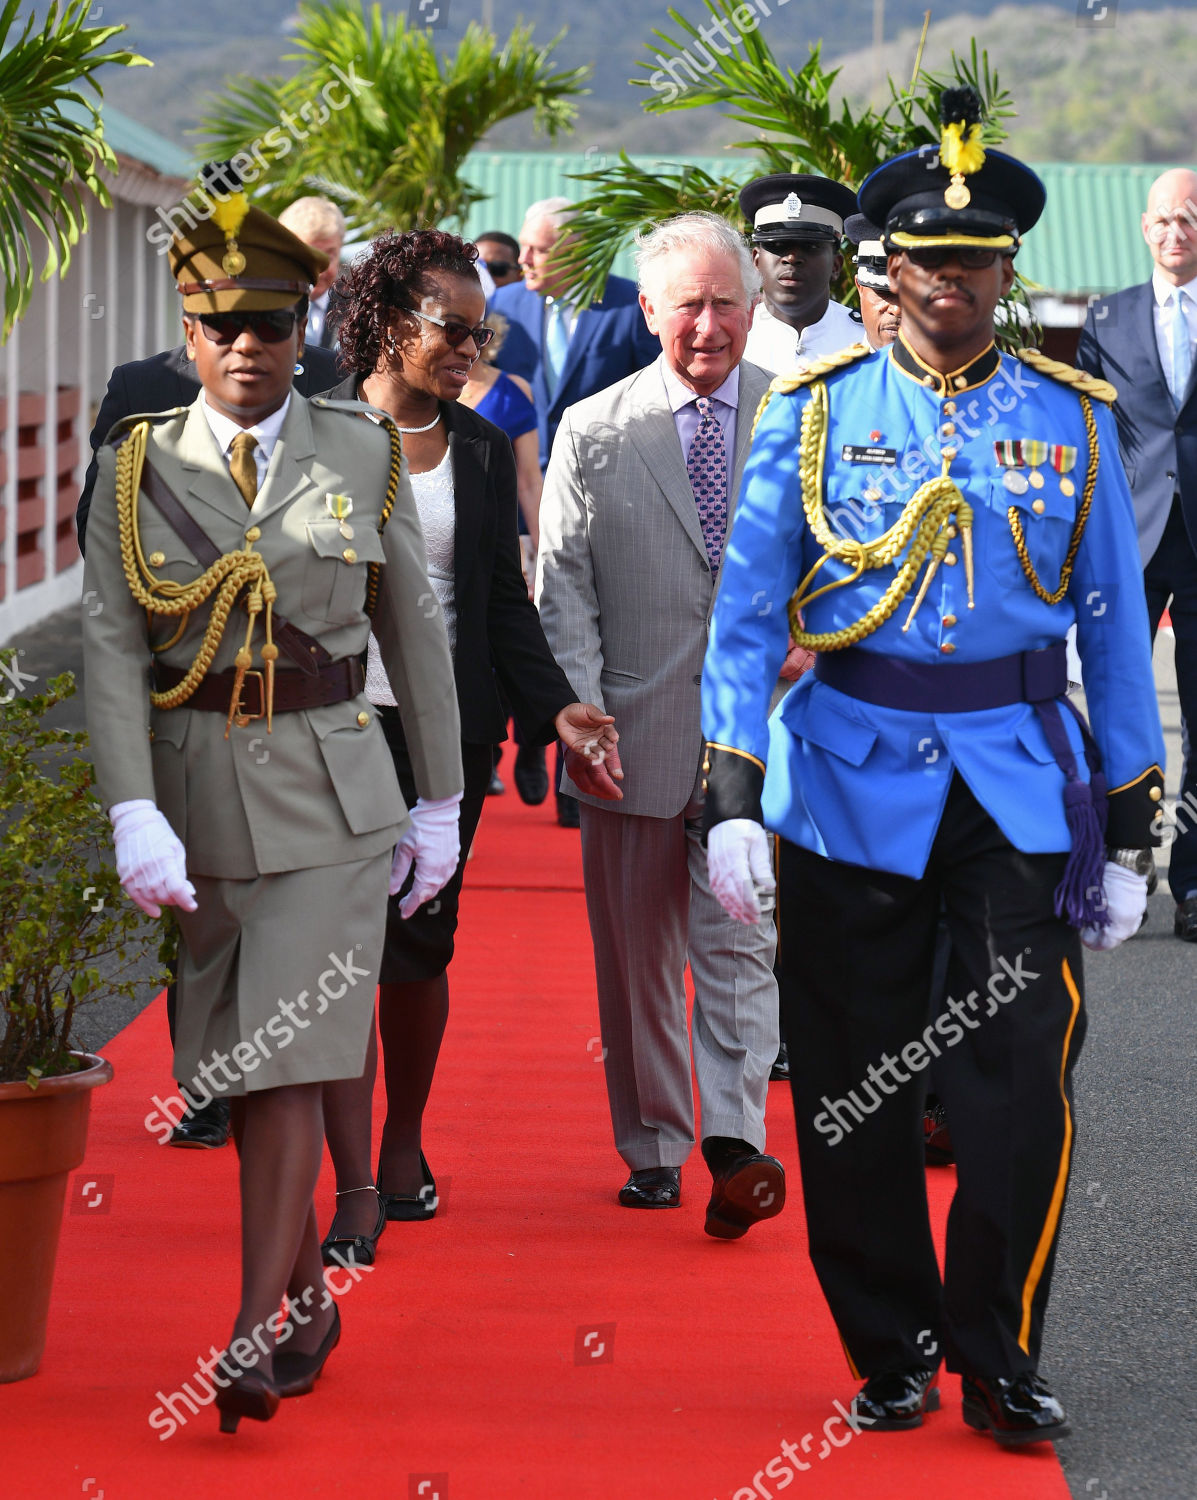 prince-charles-and-camilla-duchess-of-cornwall-caribbean-tour-st-lucia-shutterstock-editorial-10158713j.jpg